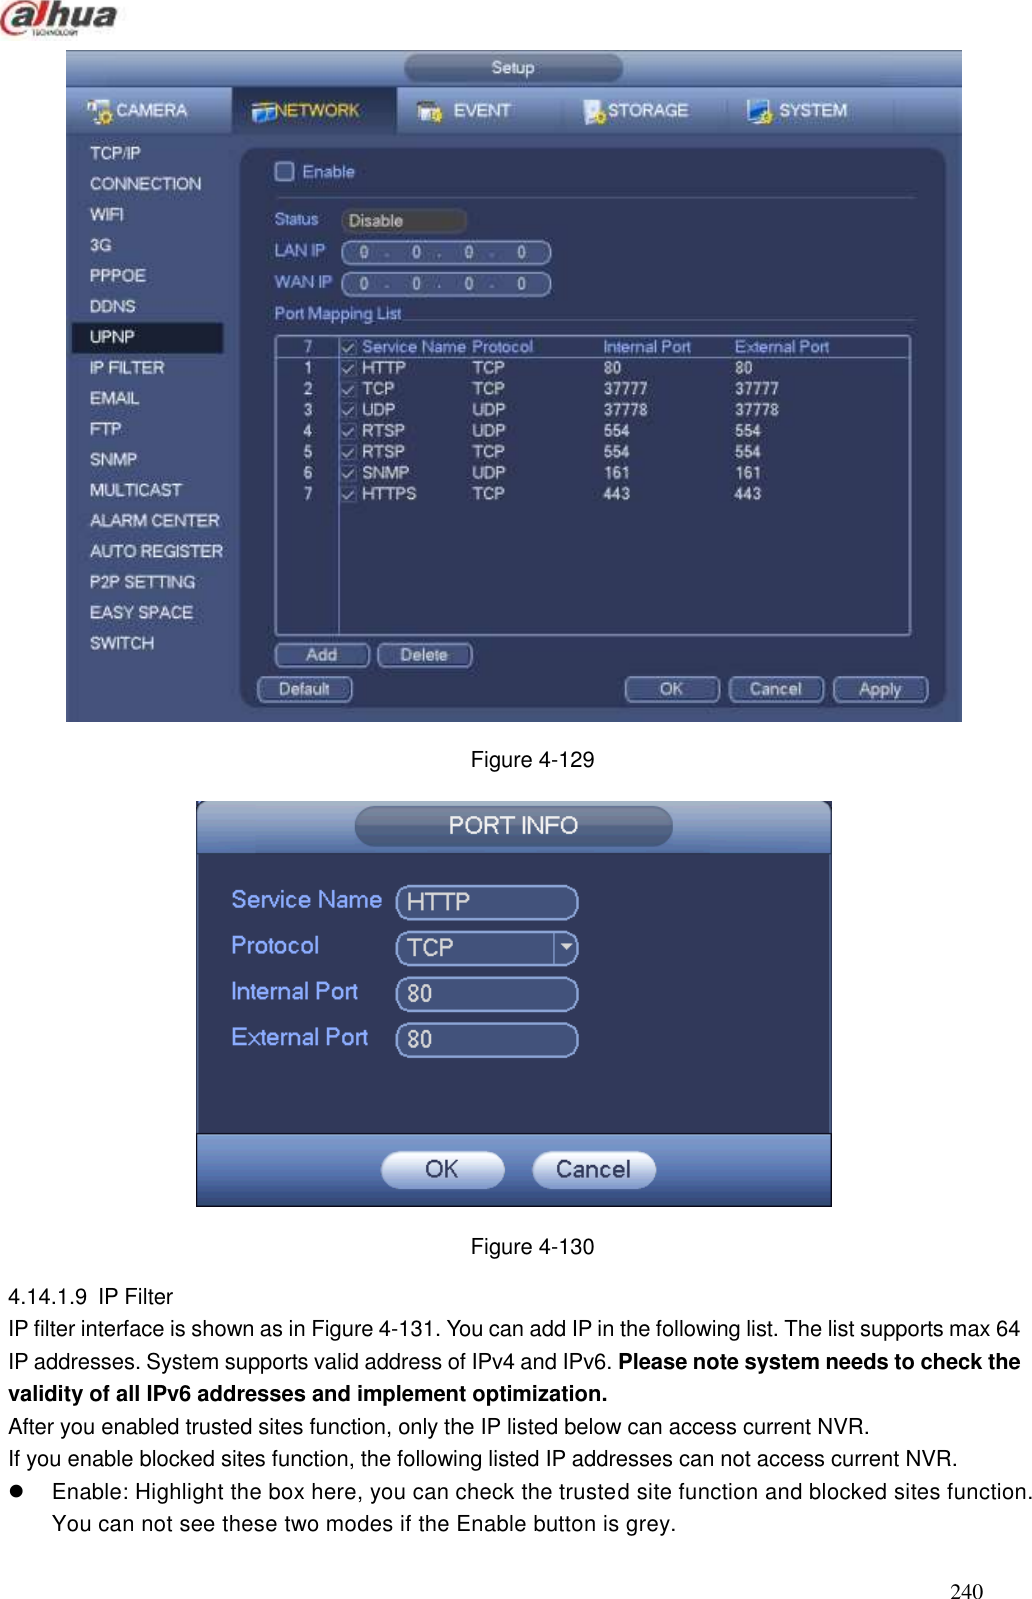  240   Figure 4-129  Figure 4-130 4.14.1.9  IP Filter   IP filter interface is shown as in Figure 4-131. You can add IP in the following list. The list supports max 64 IP addresses. System supports valid address of IPv4 and IPv6. Please note system needs to check the validity of all IPv6 addresses and implement optimization. After you enabled trusted sites function, only the IP listed below can access current NVR.   If you enable blocked sites function, the following listed IP addresses can not access current NVR.   Enable: Highlight the box here, you can check the trusted site function and blocked sites function. You can not see these two modes if the Enable button is grey.   